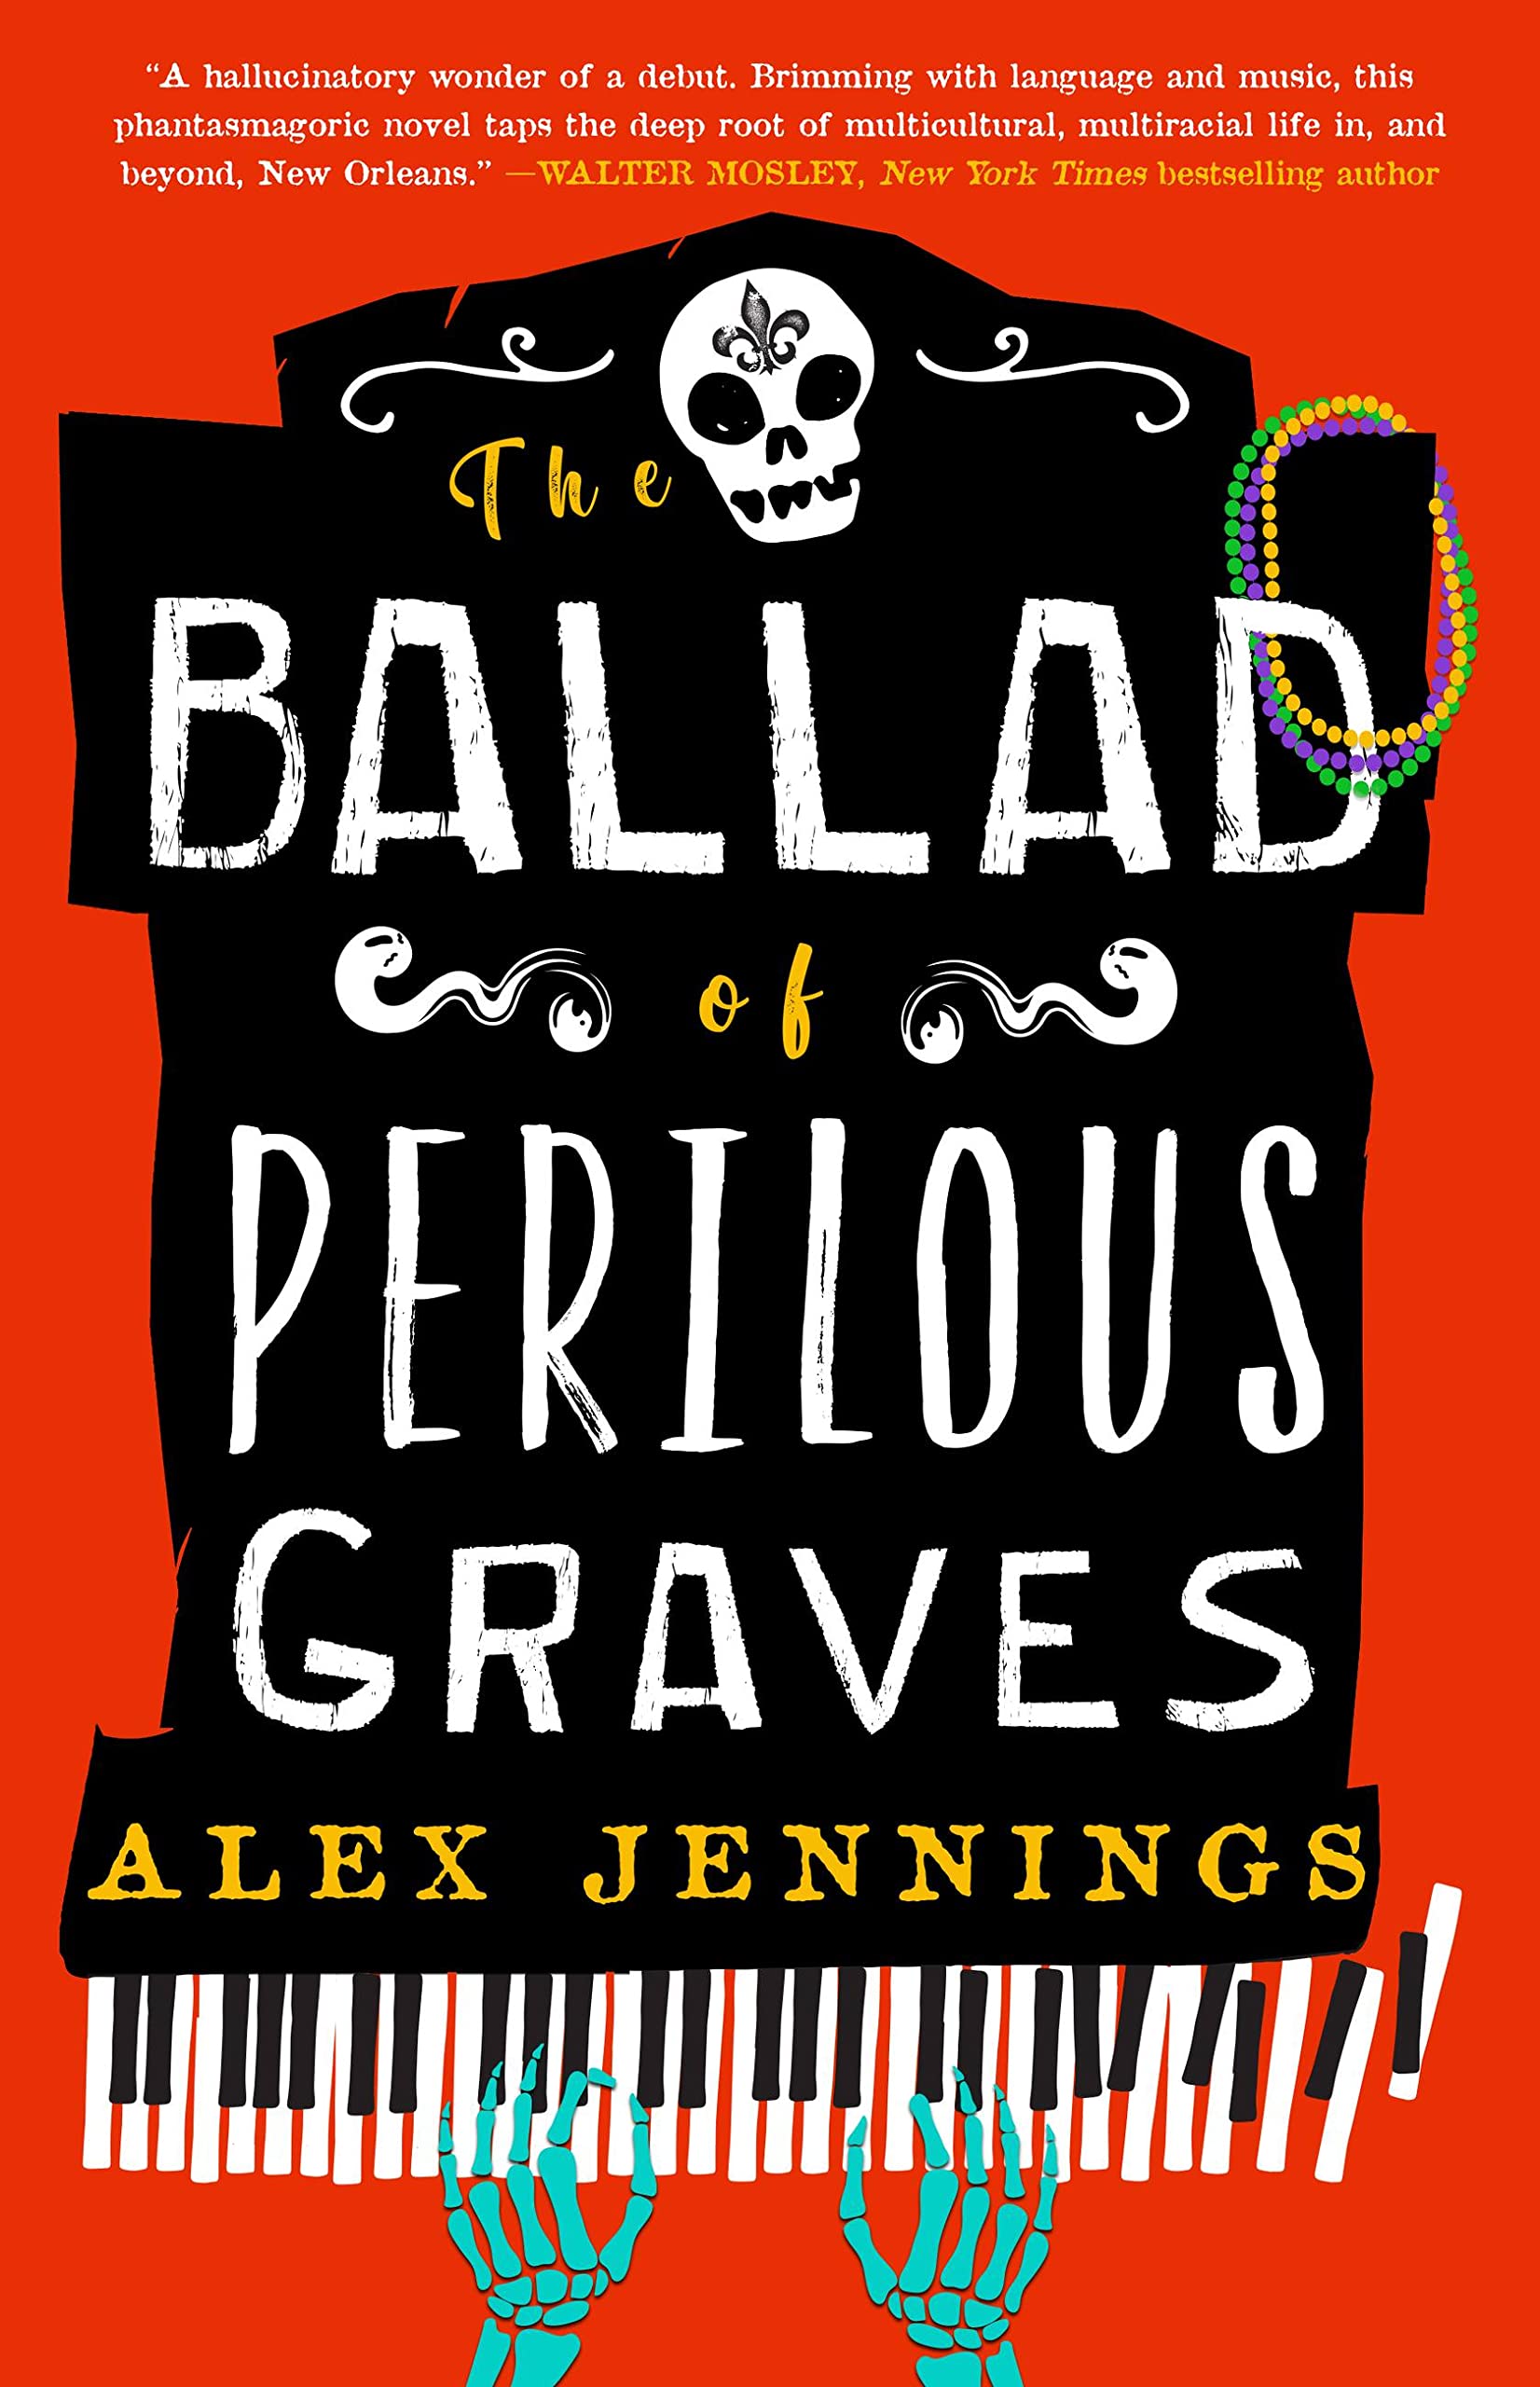 Image for "The Ballad of Perilous Graves"